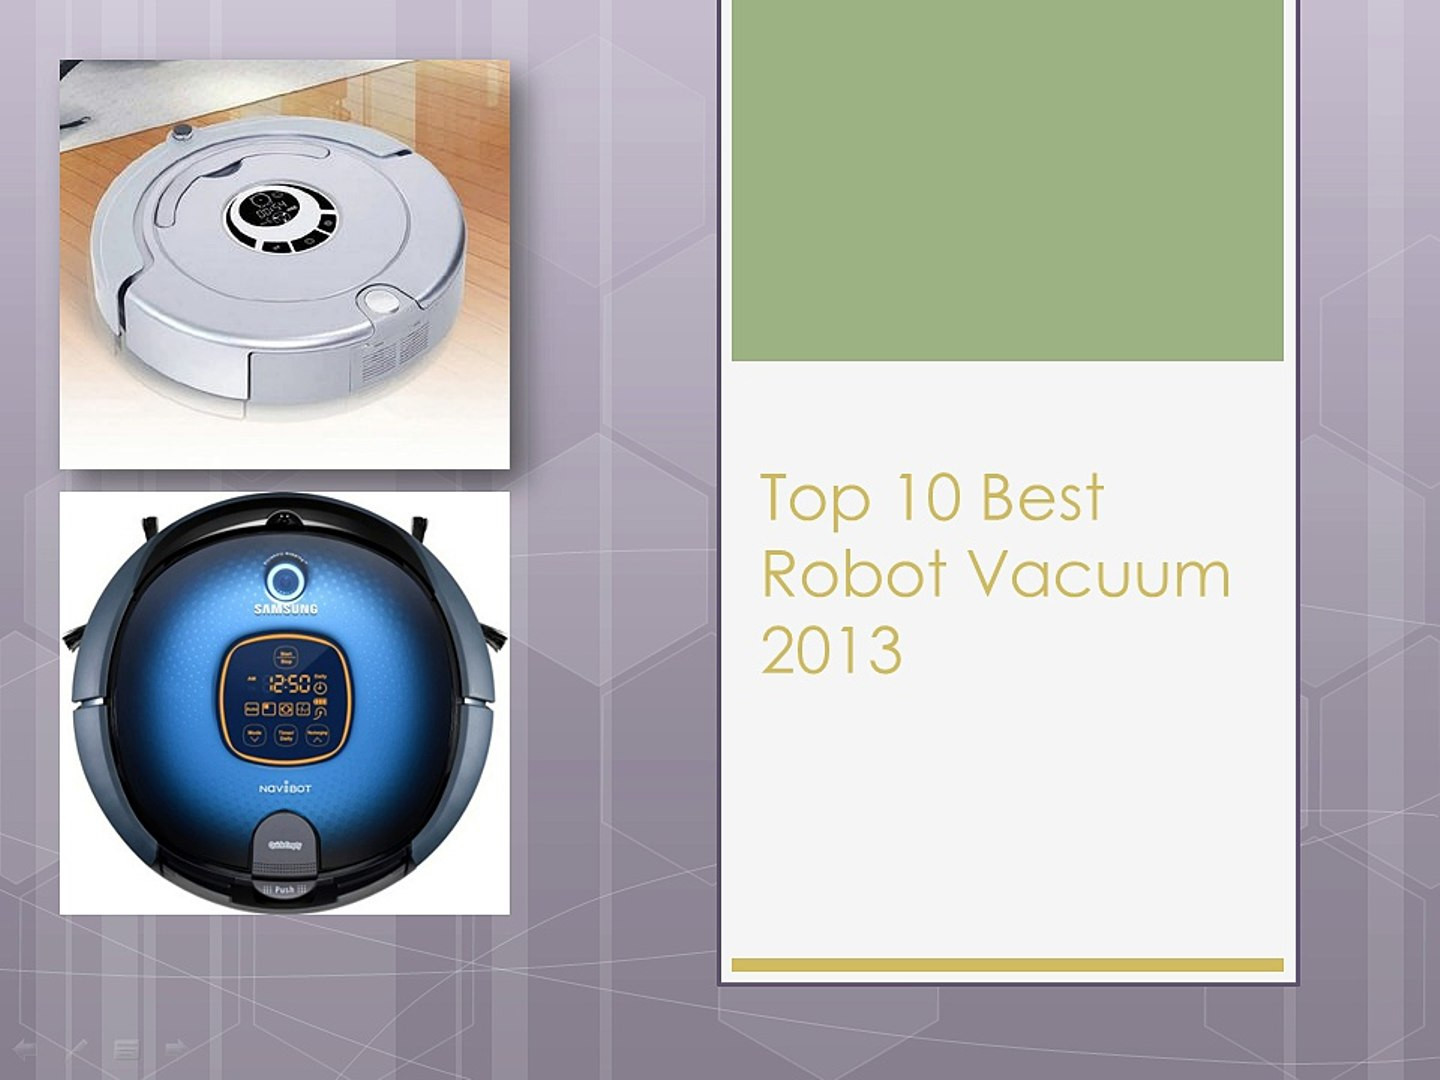 15 Lovable Best Vacuum for Pet Hair and Hardwood Floors and Carpet 2022 free download best vacuum for pet hair and hardwood floors and carpet of top 10 best robotic vacuum cleaner for hardwood floors 2013 video intended for top 10 best robotic vacuum cleaner for hardwood floo